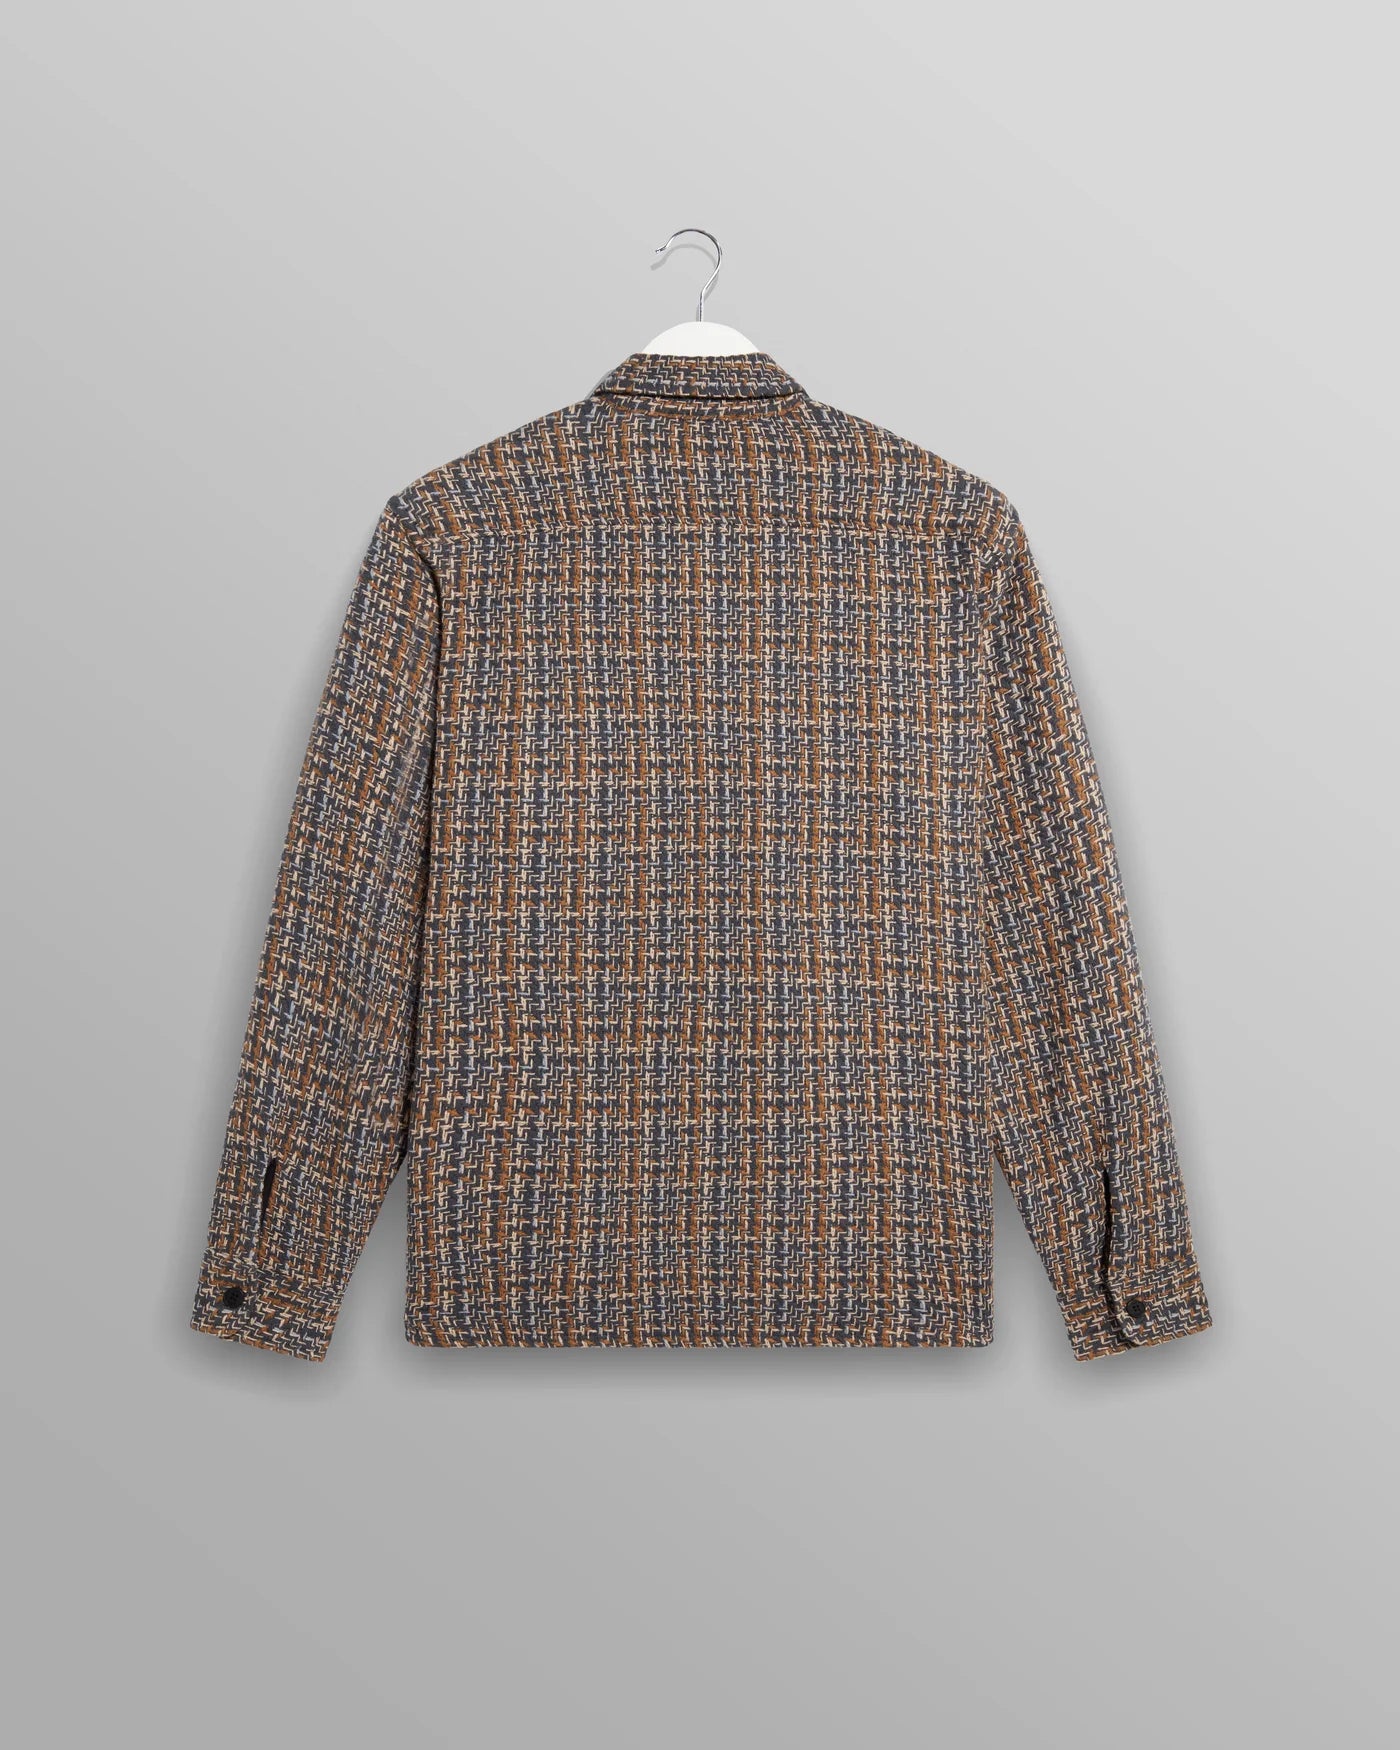 WAX LONDON CLOTHING Whiting Overshirt -Eden Check Charcoal